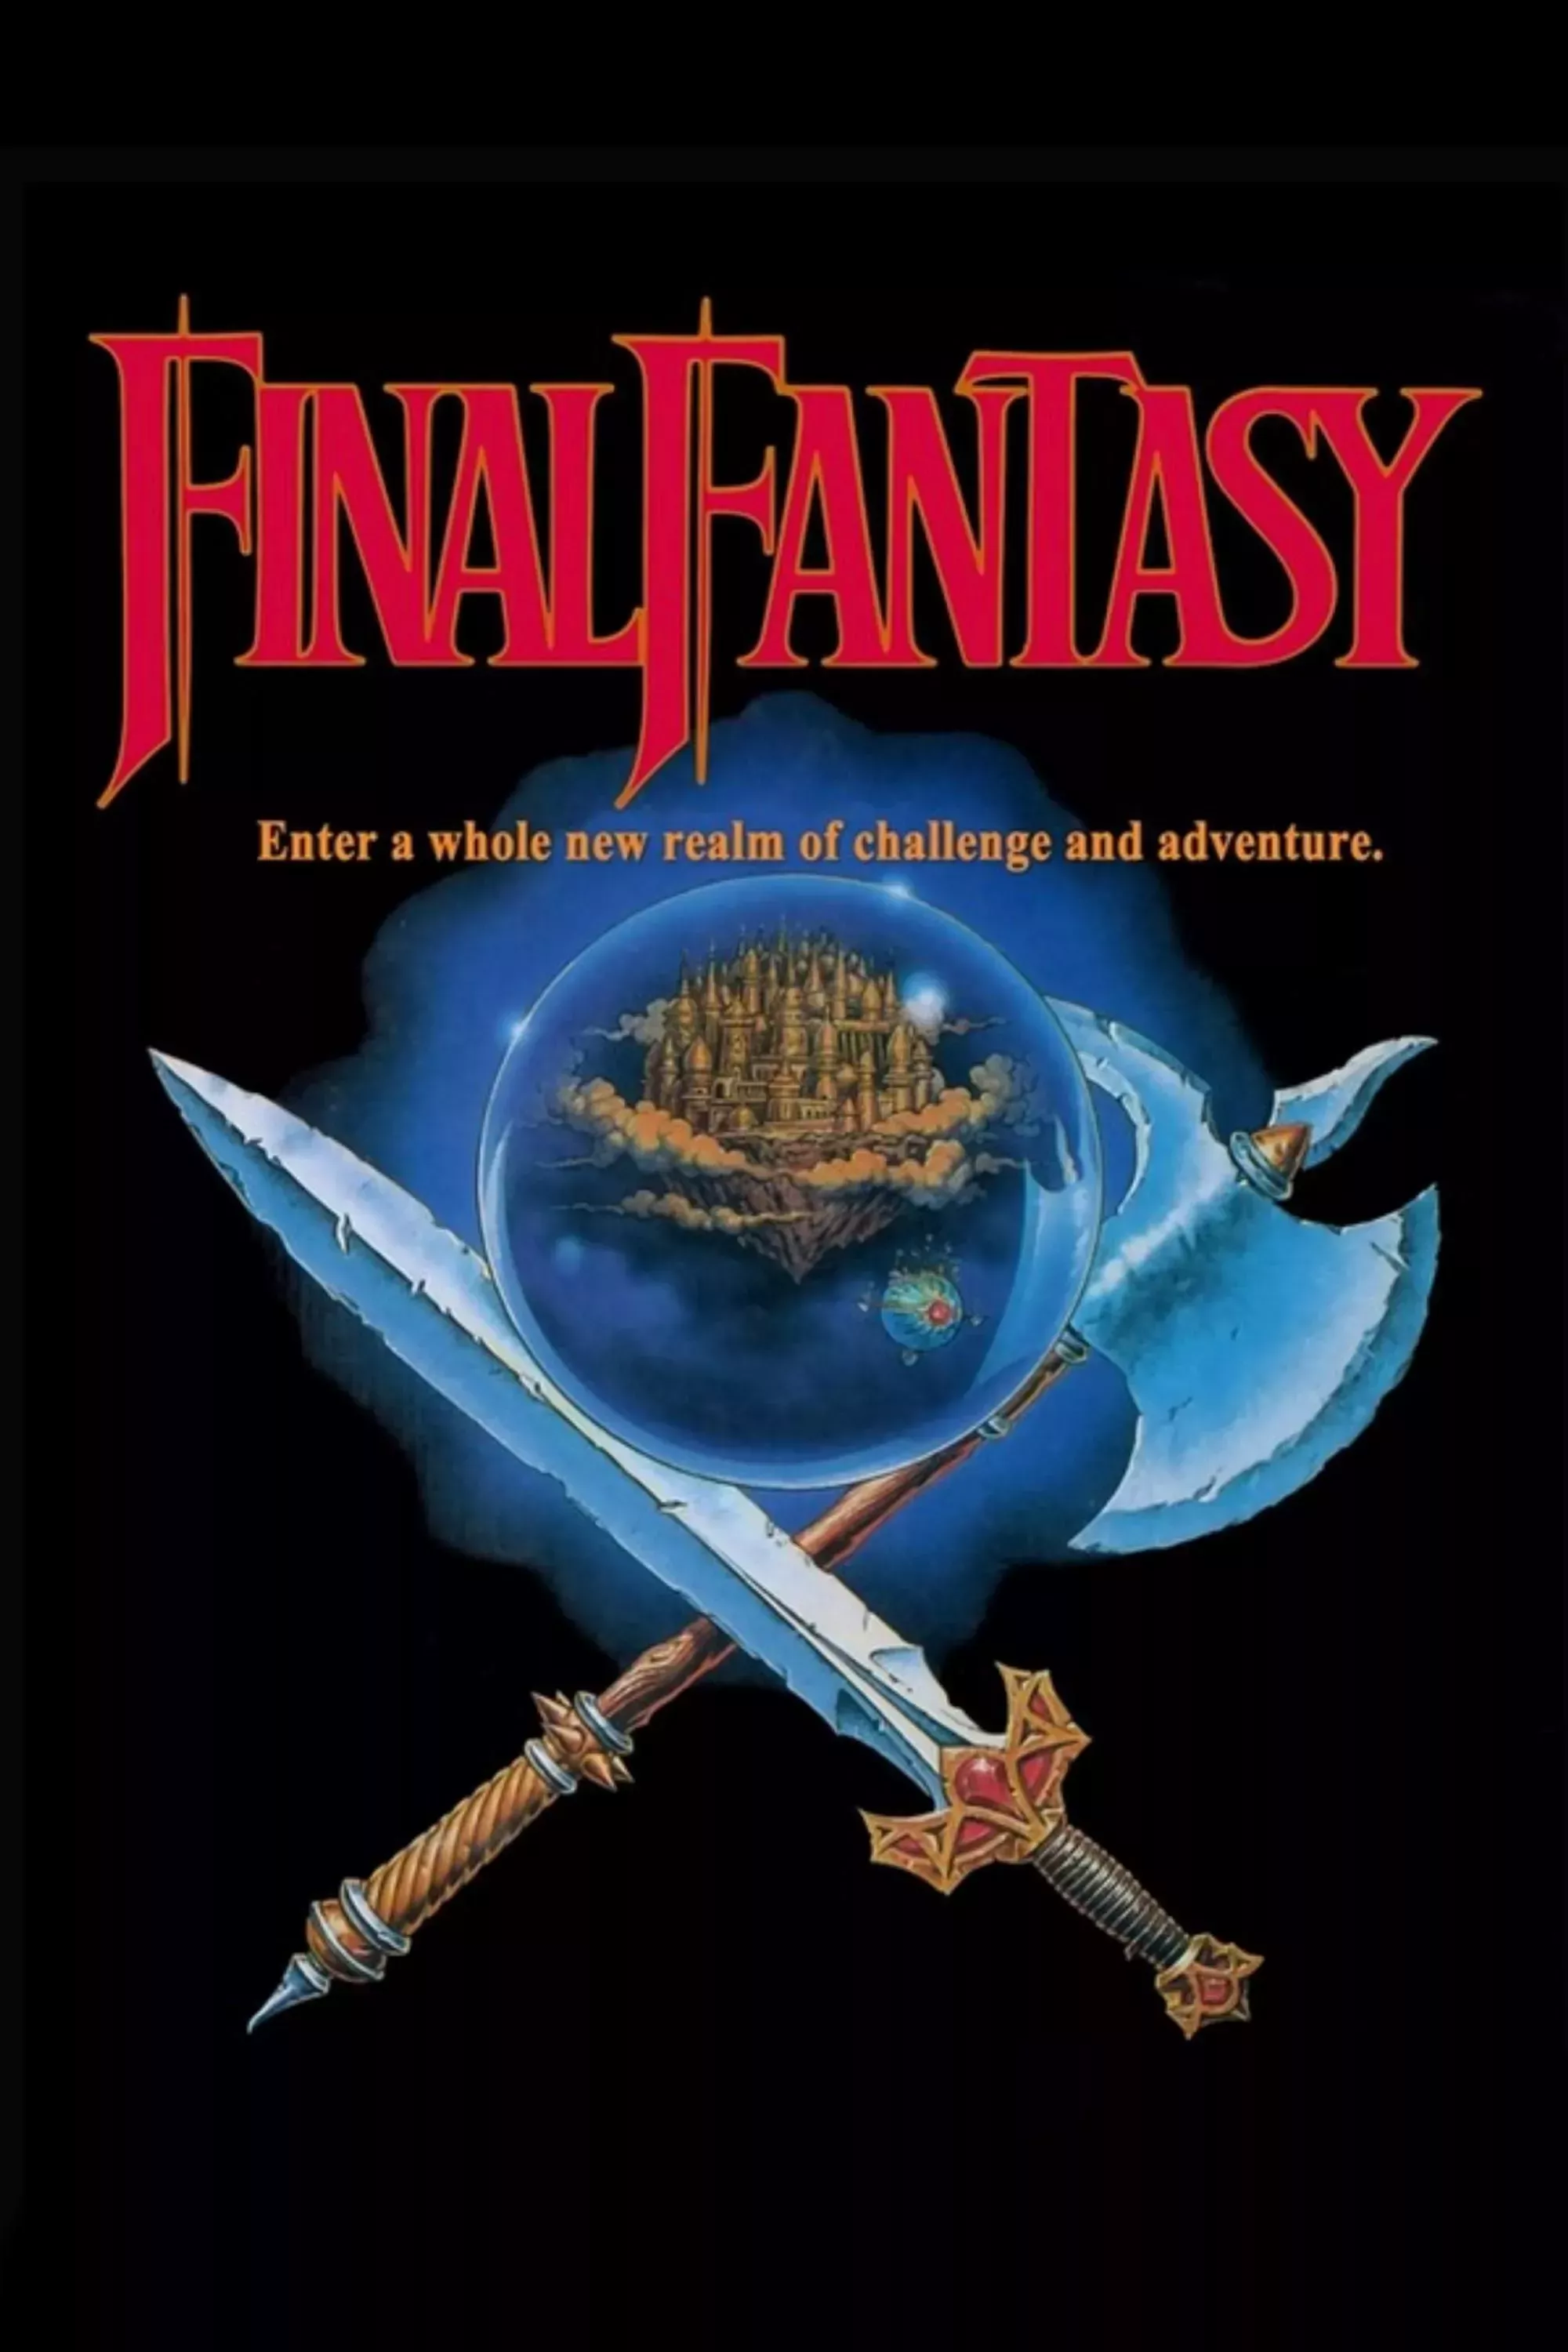 Final Fantasy (1987) video game poster